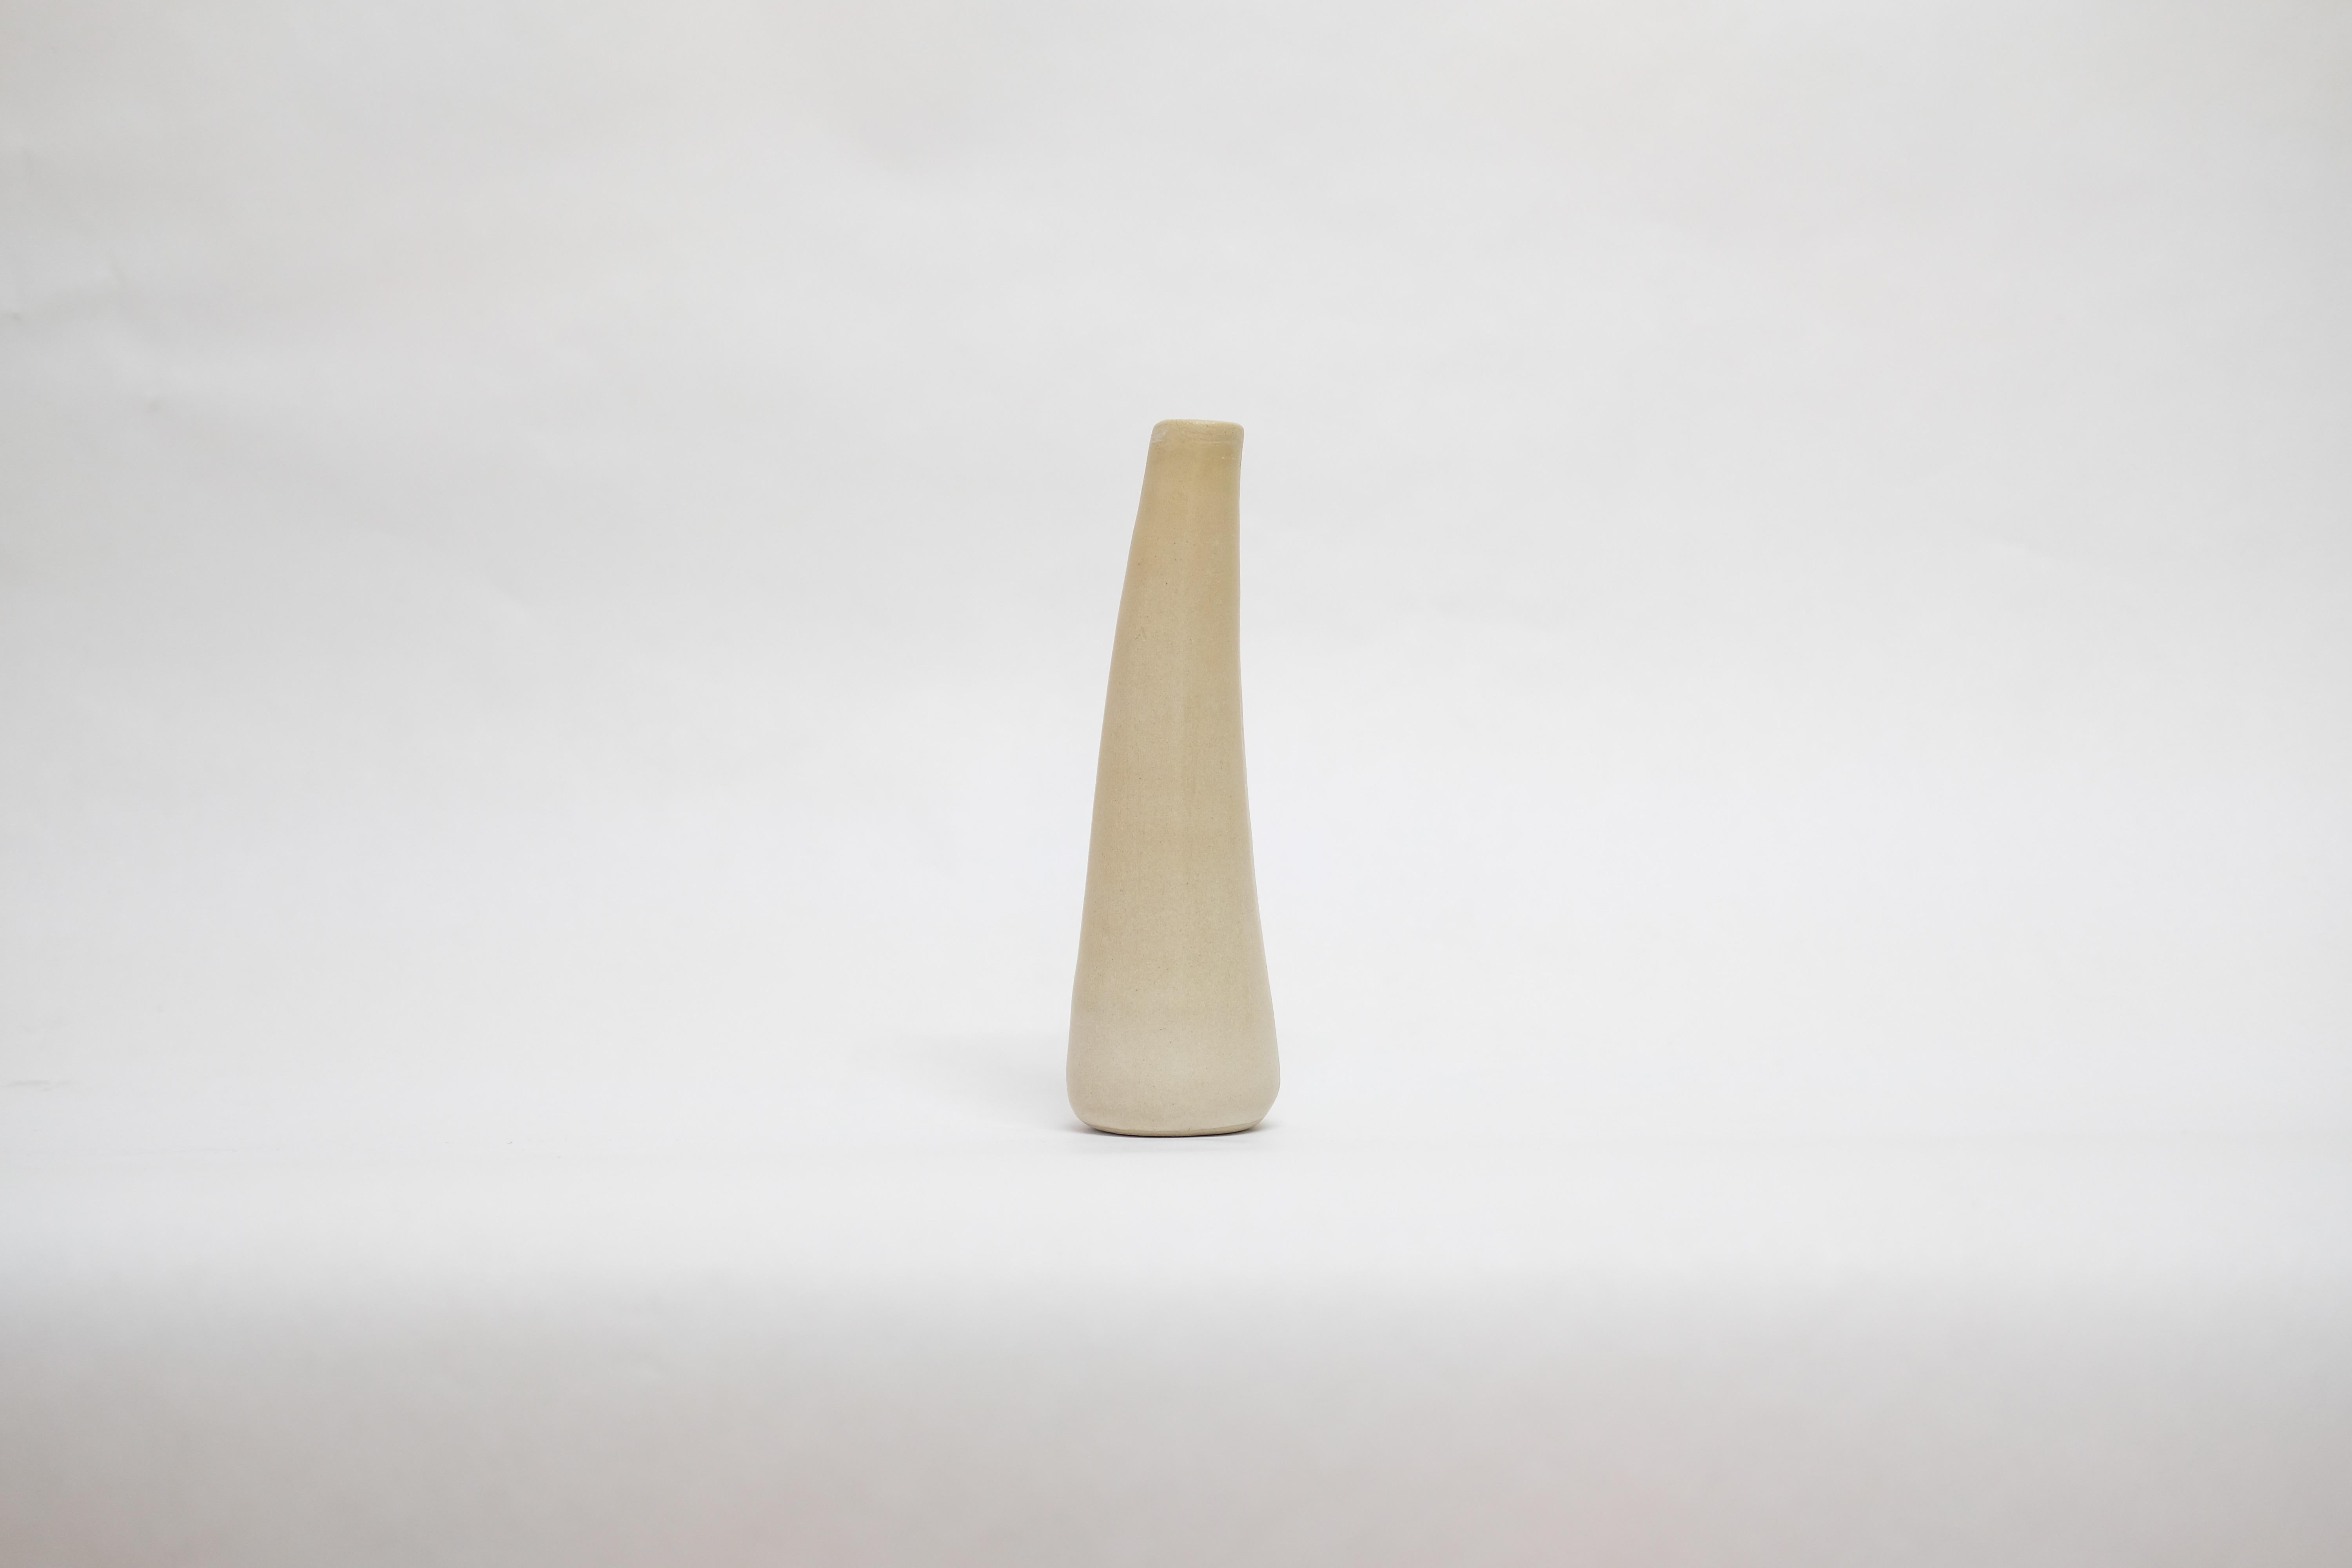 Solitario Stoneware vase by Camila Apaez
One of a kind
Materials: Stoneware
Dimensions: 7 x 7 x 19 cm

This year has been shaped by the topographies of our homes and the uncertainty of our time. We have found solace in the humbleness of silence and